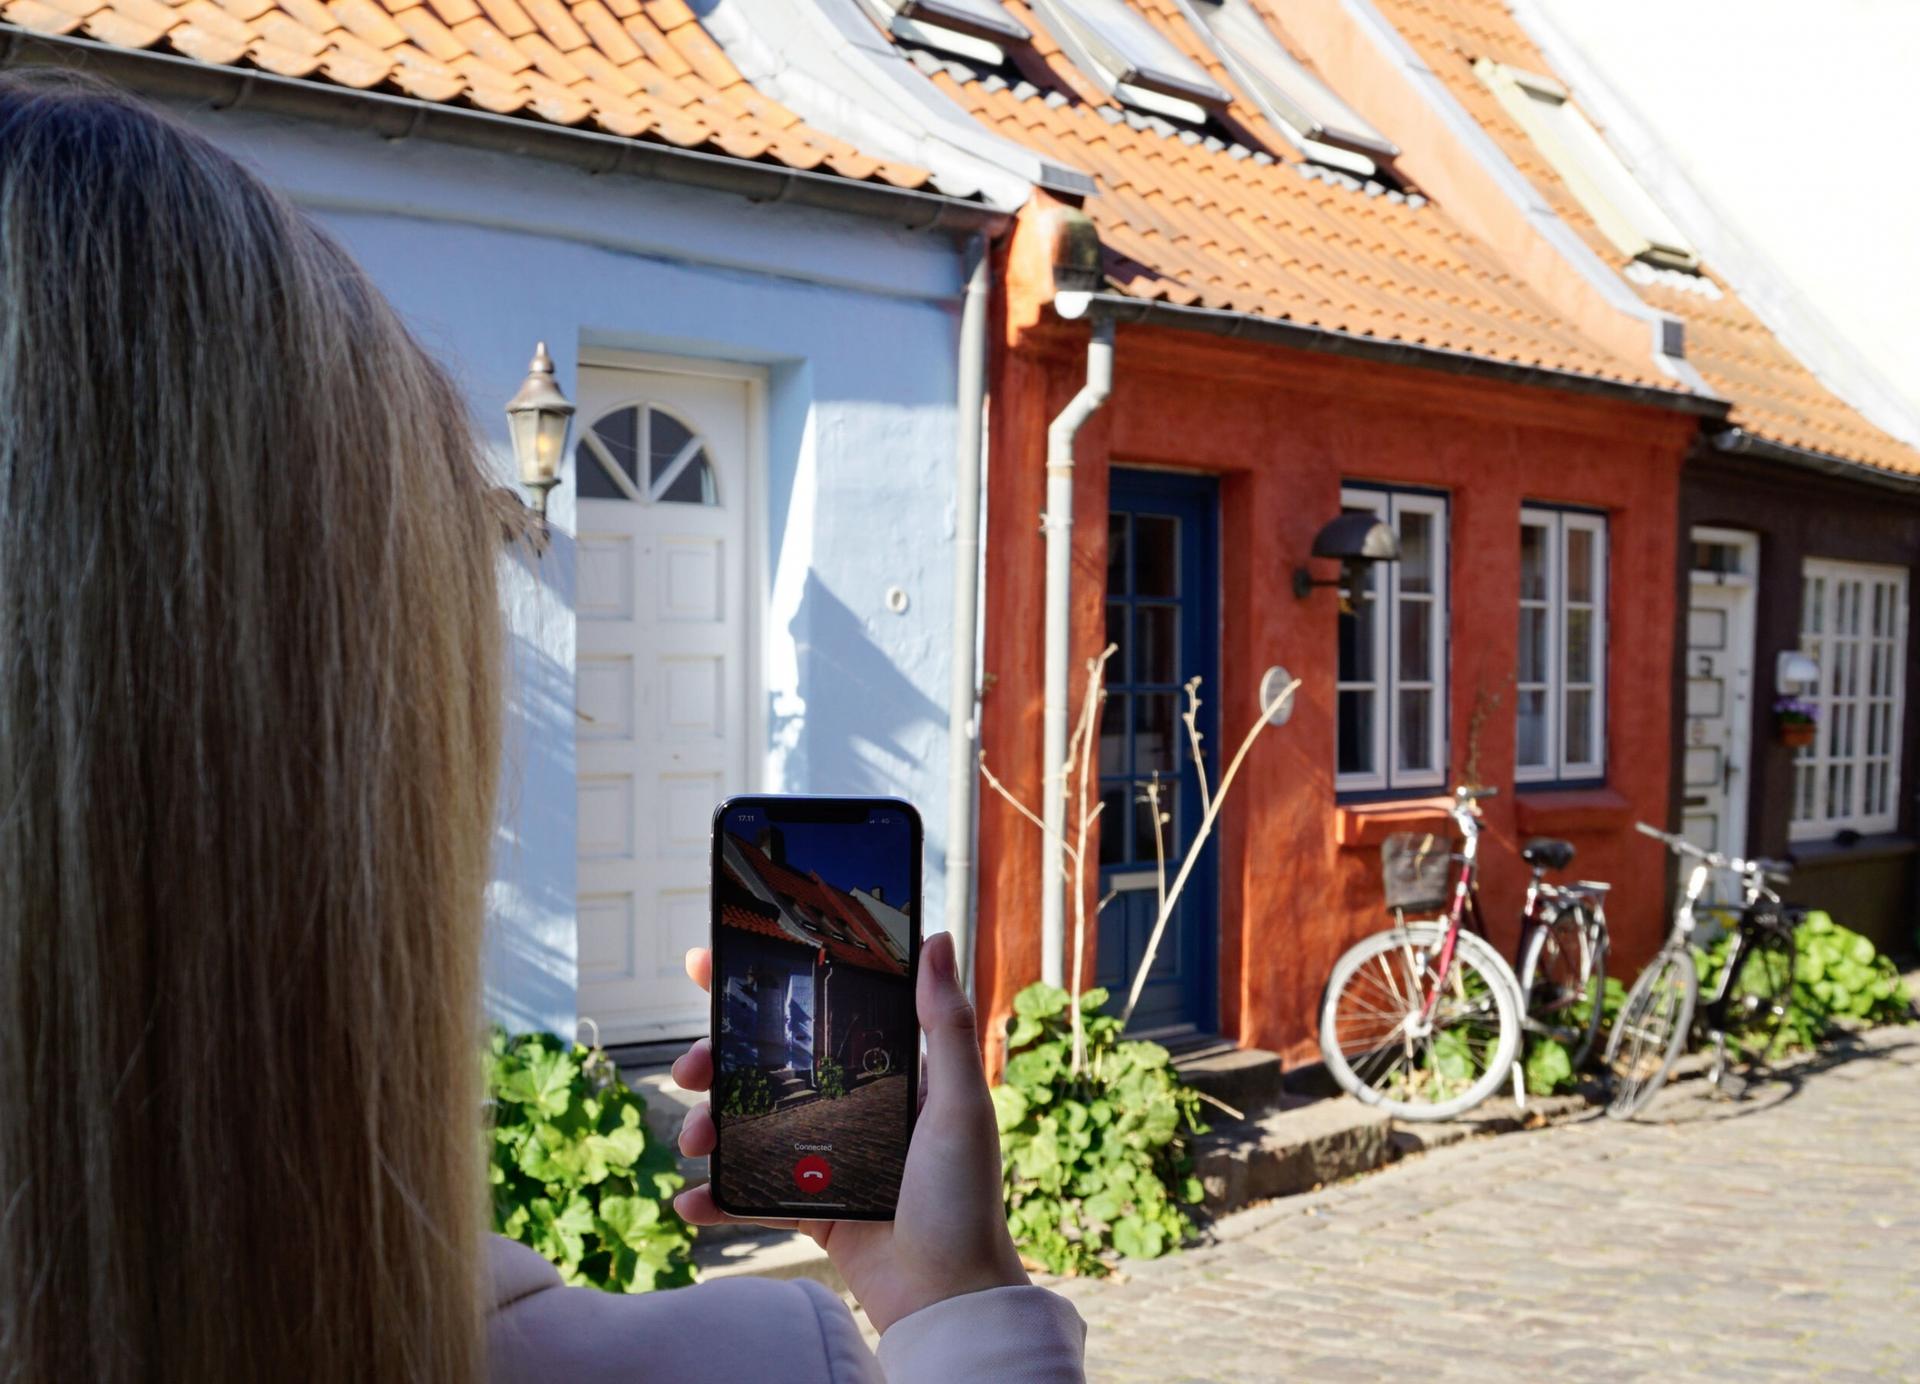 A woman uses Be My Eyes video chat app to connect with a sighted volunteer to show a house on a cobblestone street. 